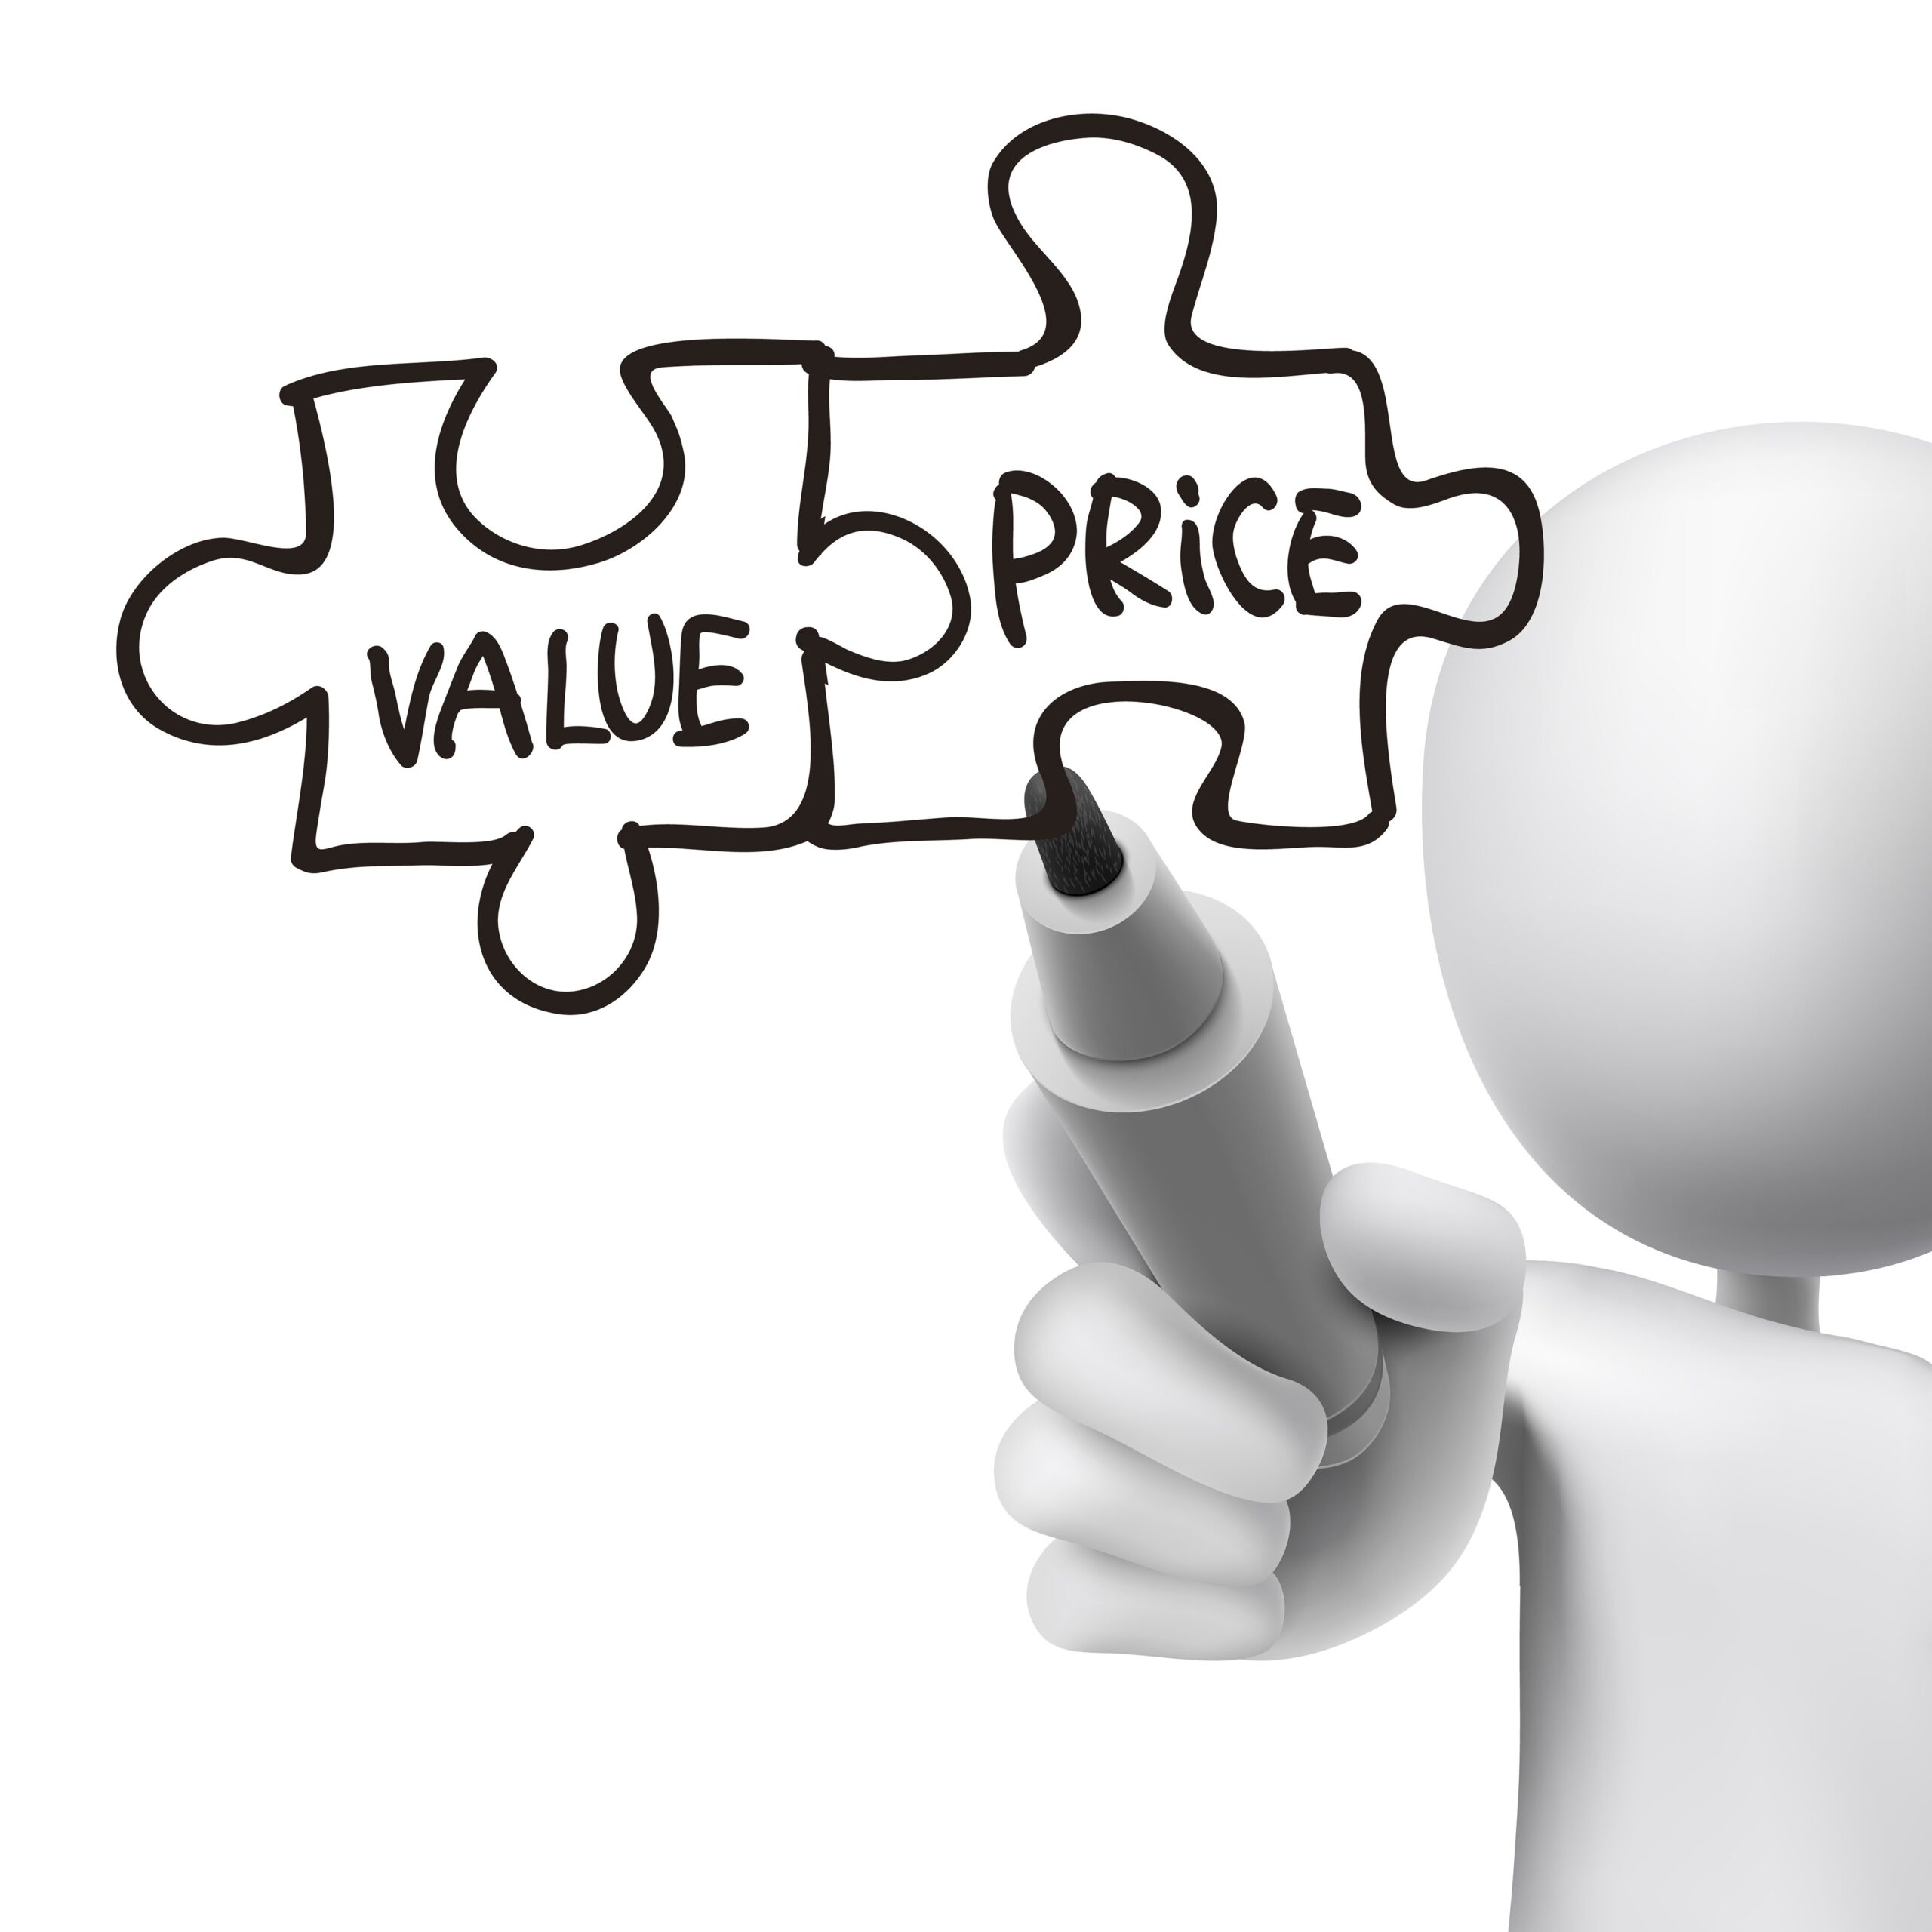 value and price words written by 3d man